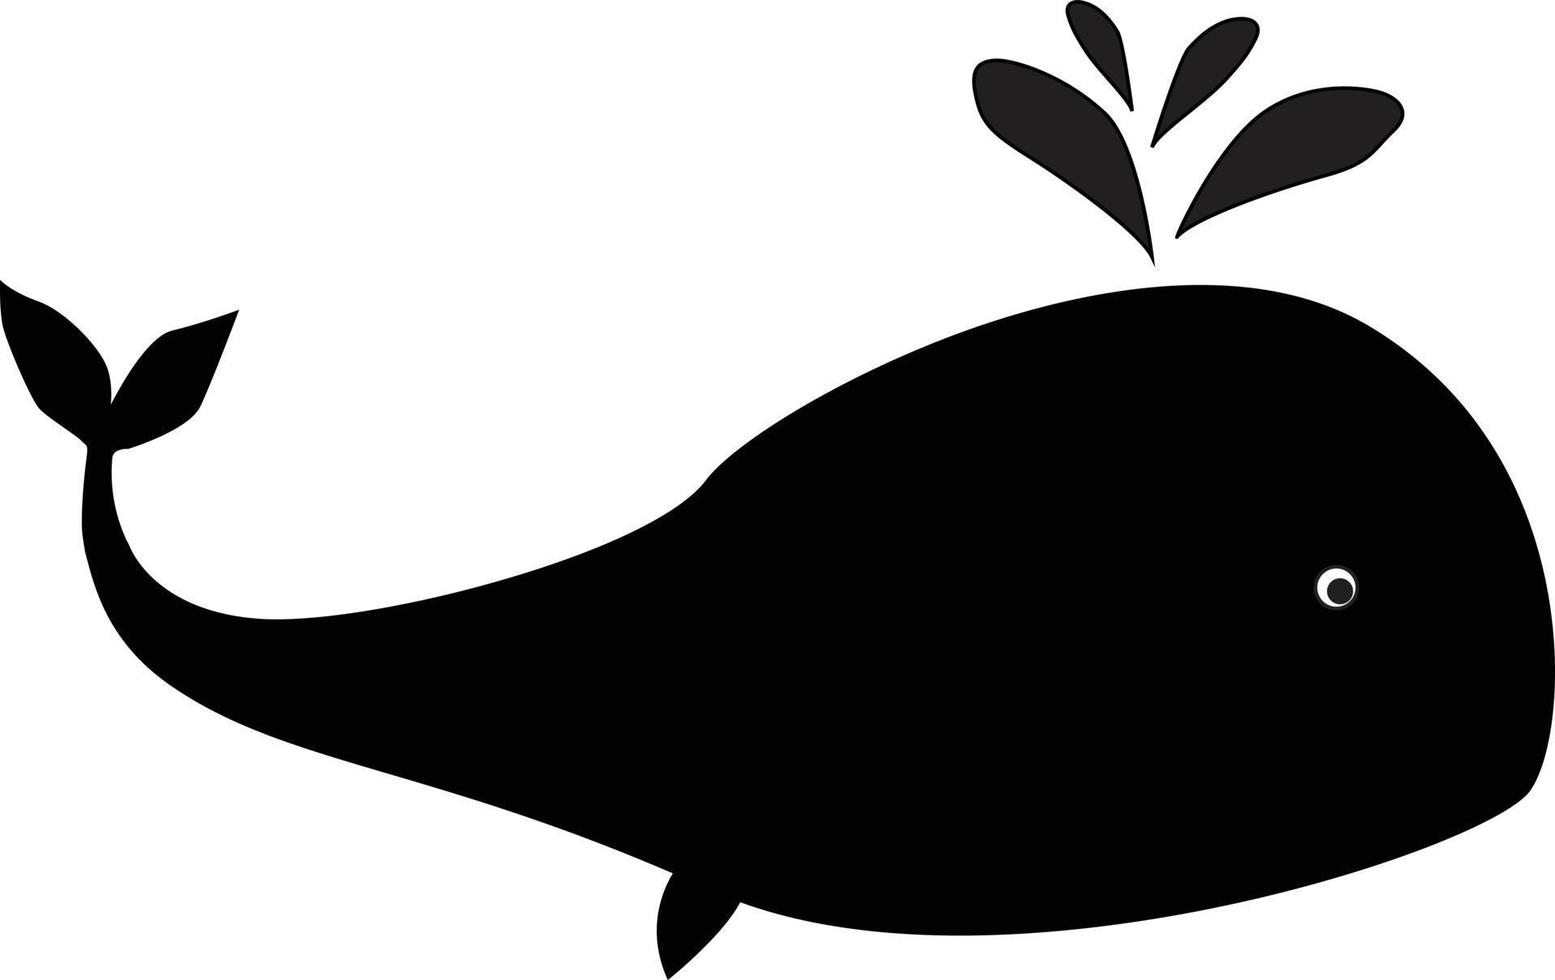 Whale with a splashing fountain icon on white background. Whale sign. Animal,aquatic symbol. flat style. vector